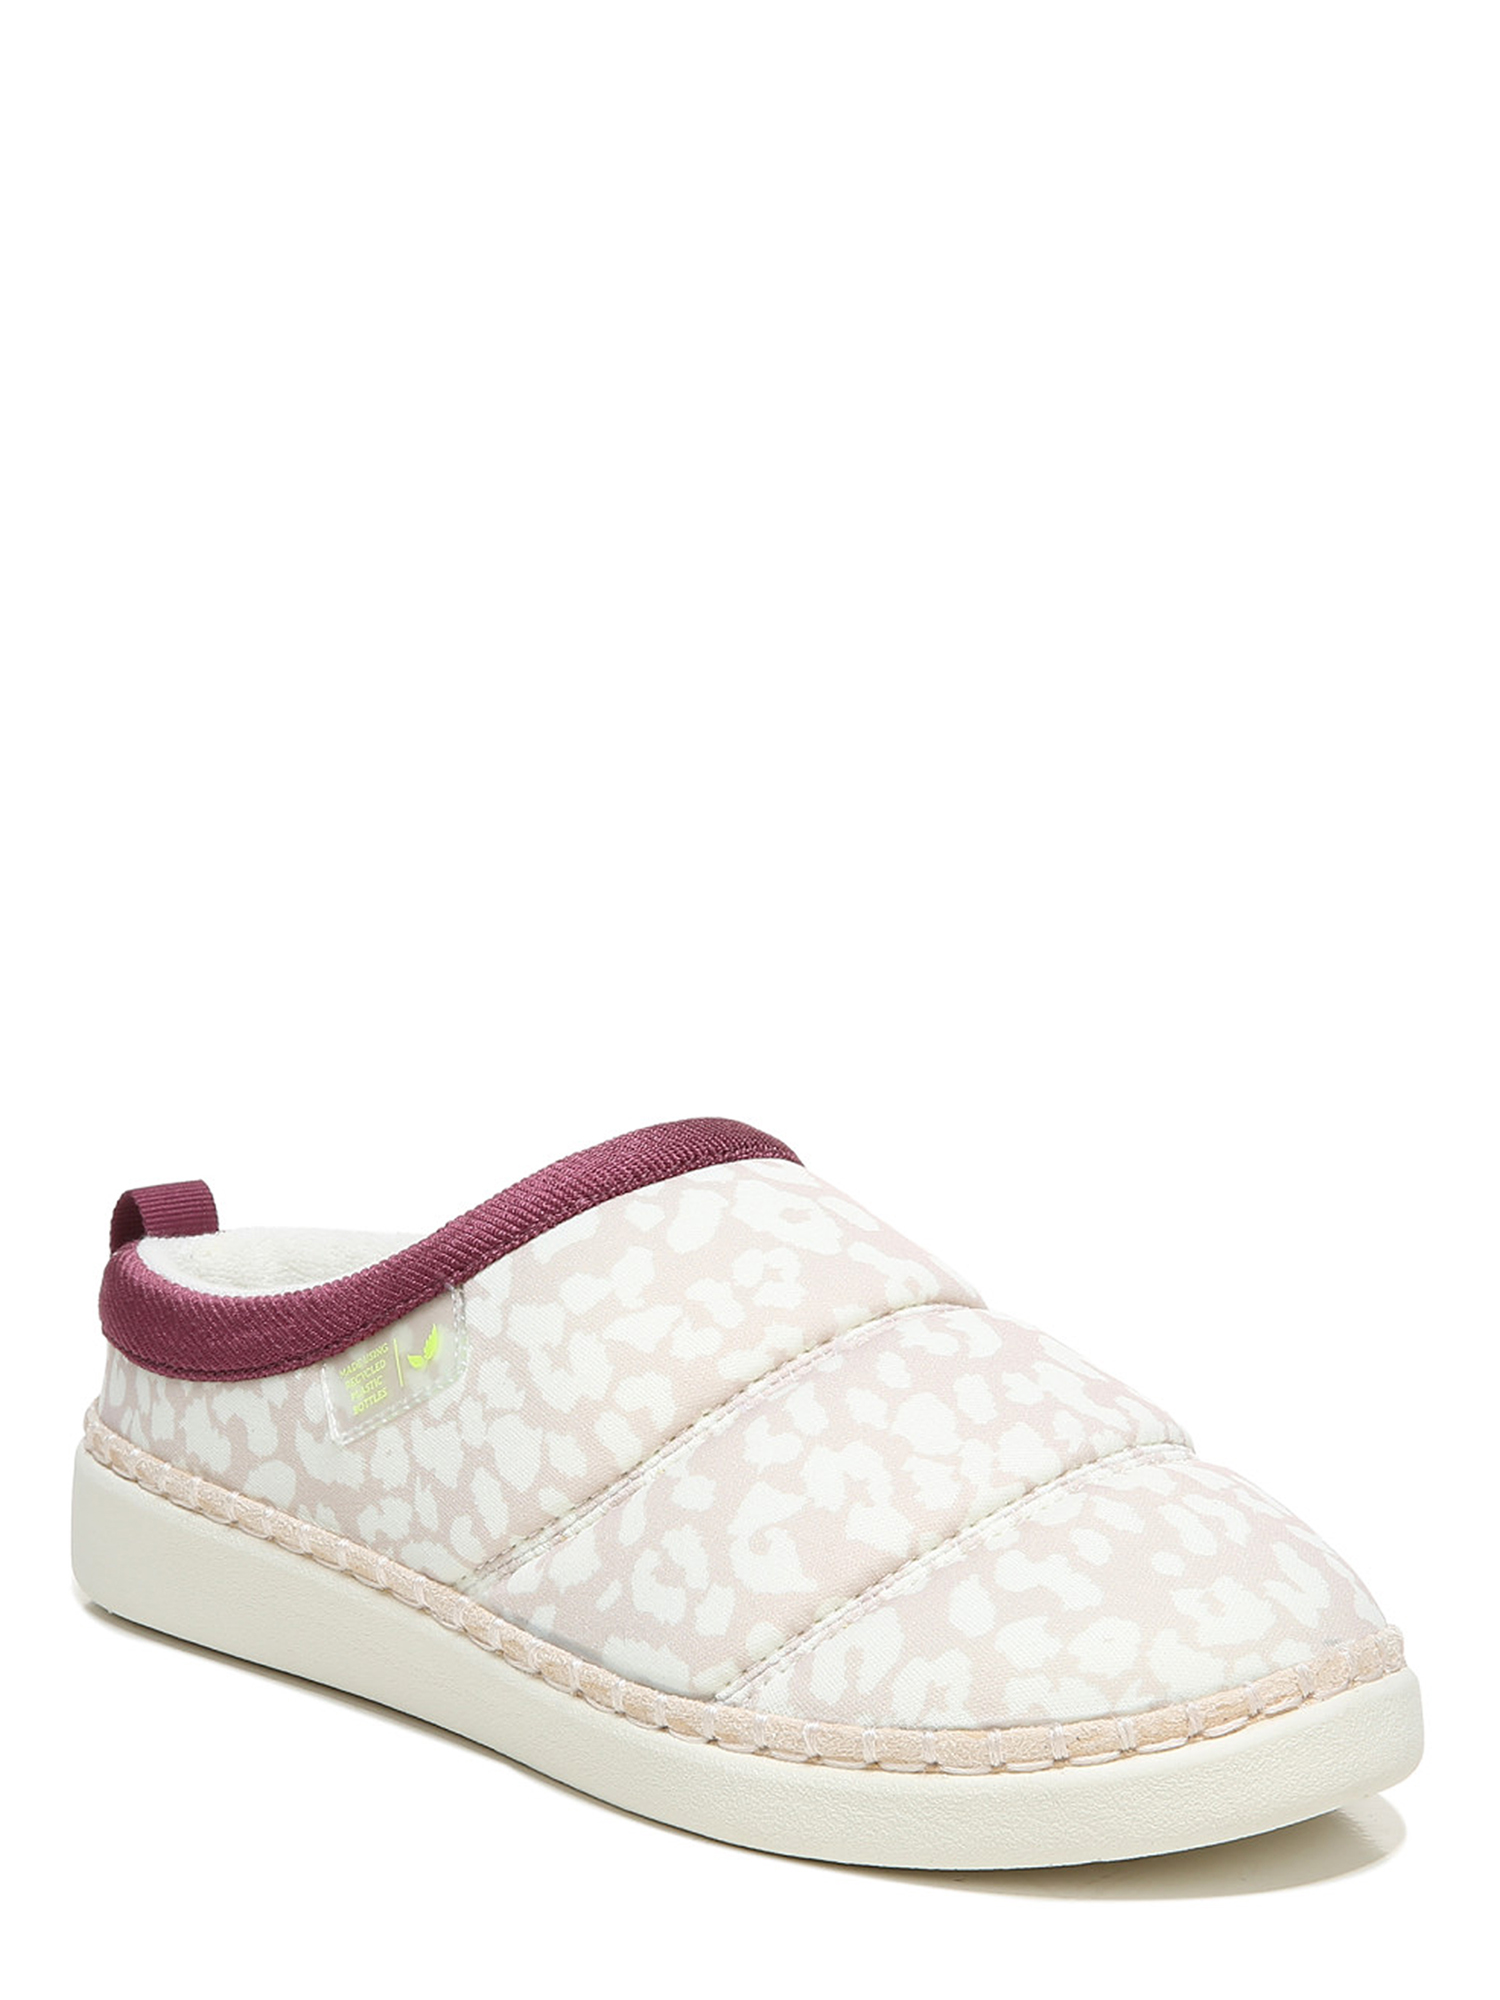 Dr. Scholl's Women's Cozy Vibes Quilted Slipper - image 1 of 6